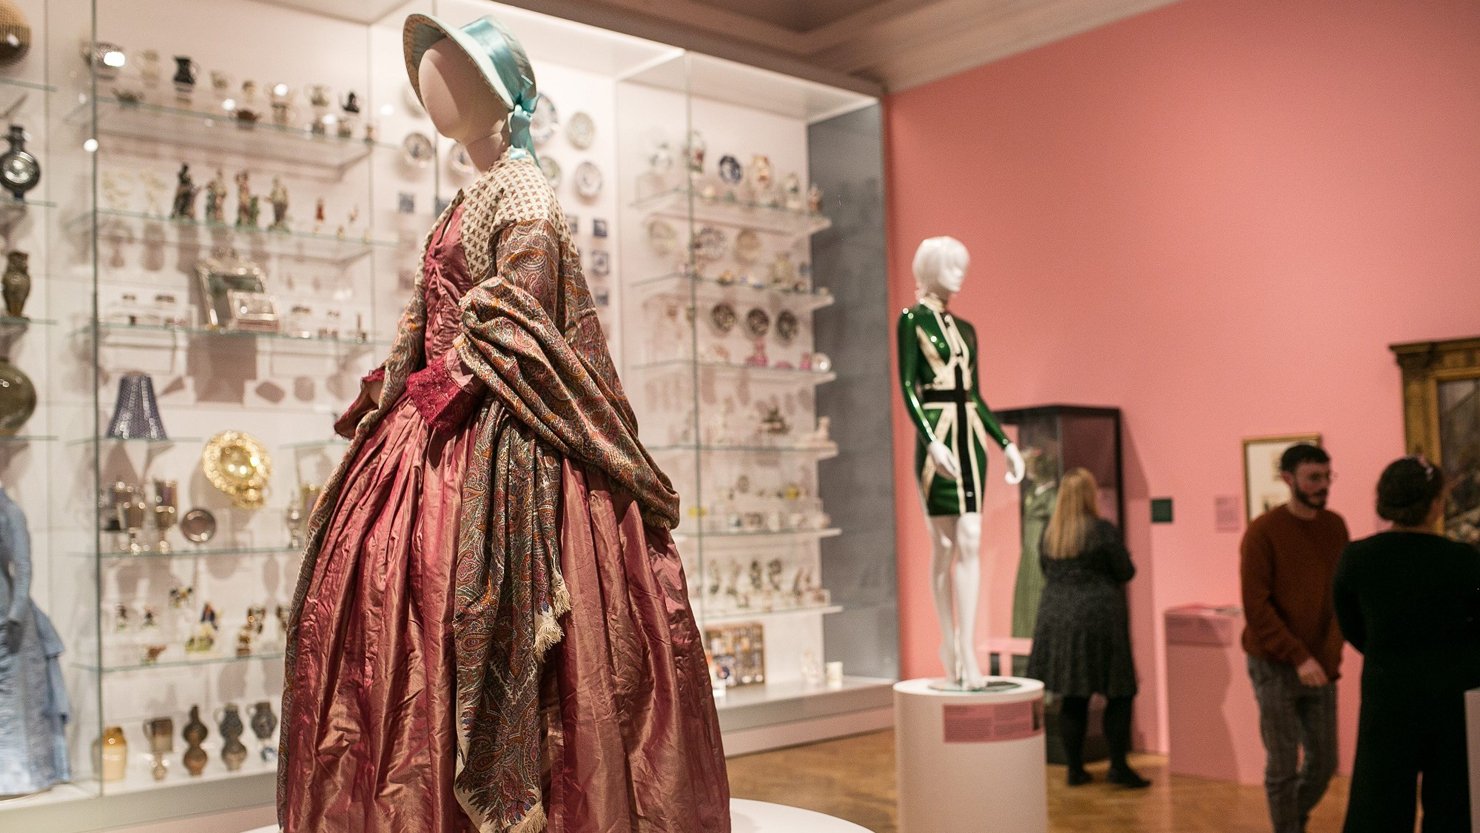 Plymouth’s first-ever dedicated fashion exhibition highlights centuries of stories